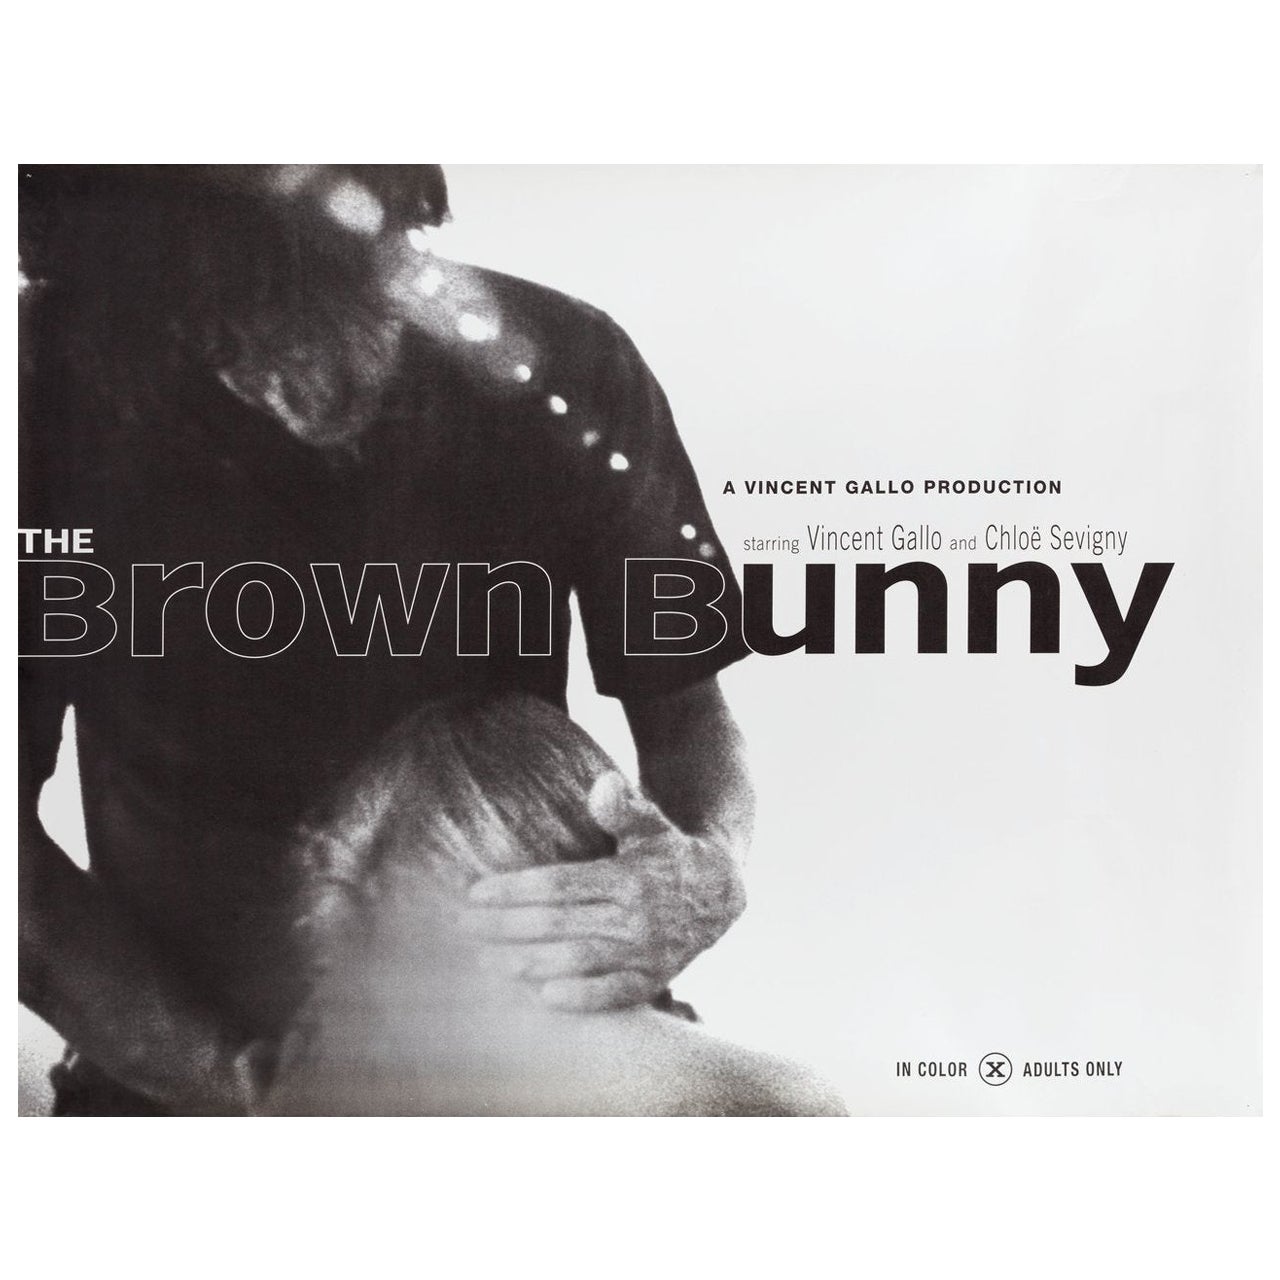 The Brown Bunny 2003 U.S. Subway Film Poster For Sale